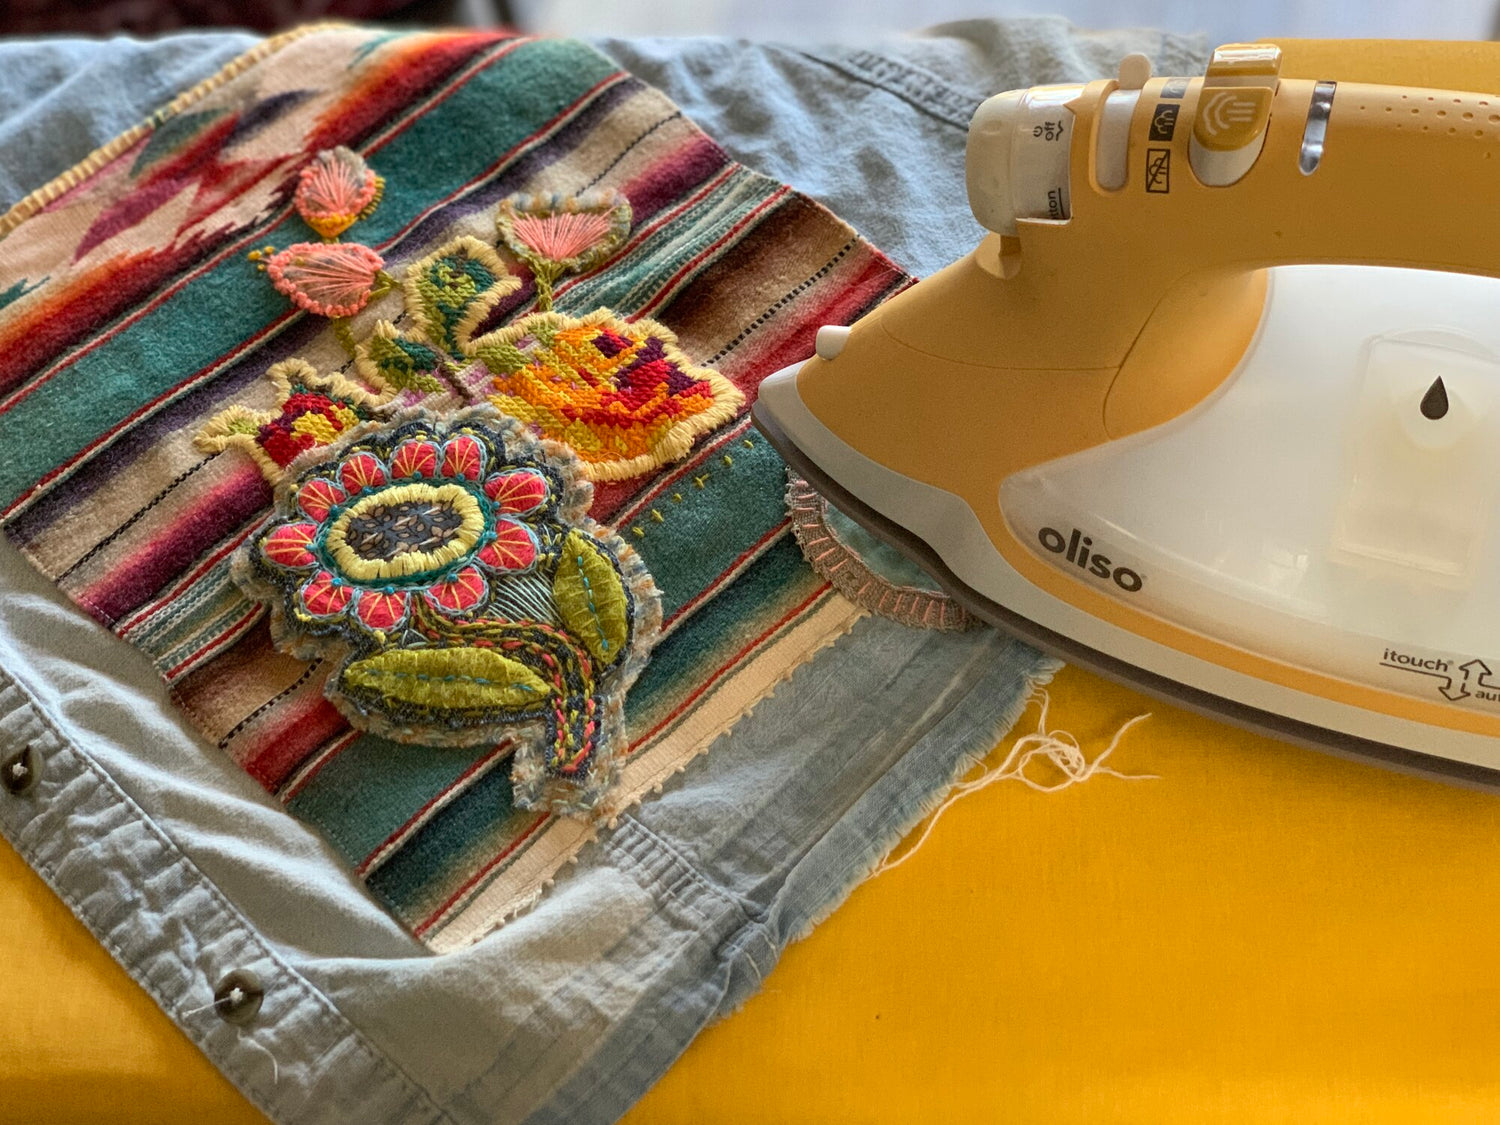 Singer Coral 1200 W Steam Iron Price in India - Buy Singer Coral 1200 W  Steam Iron Online at